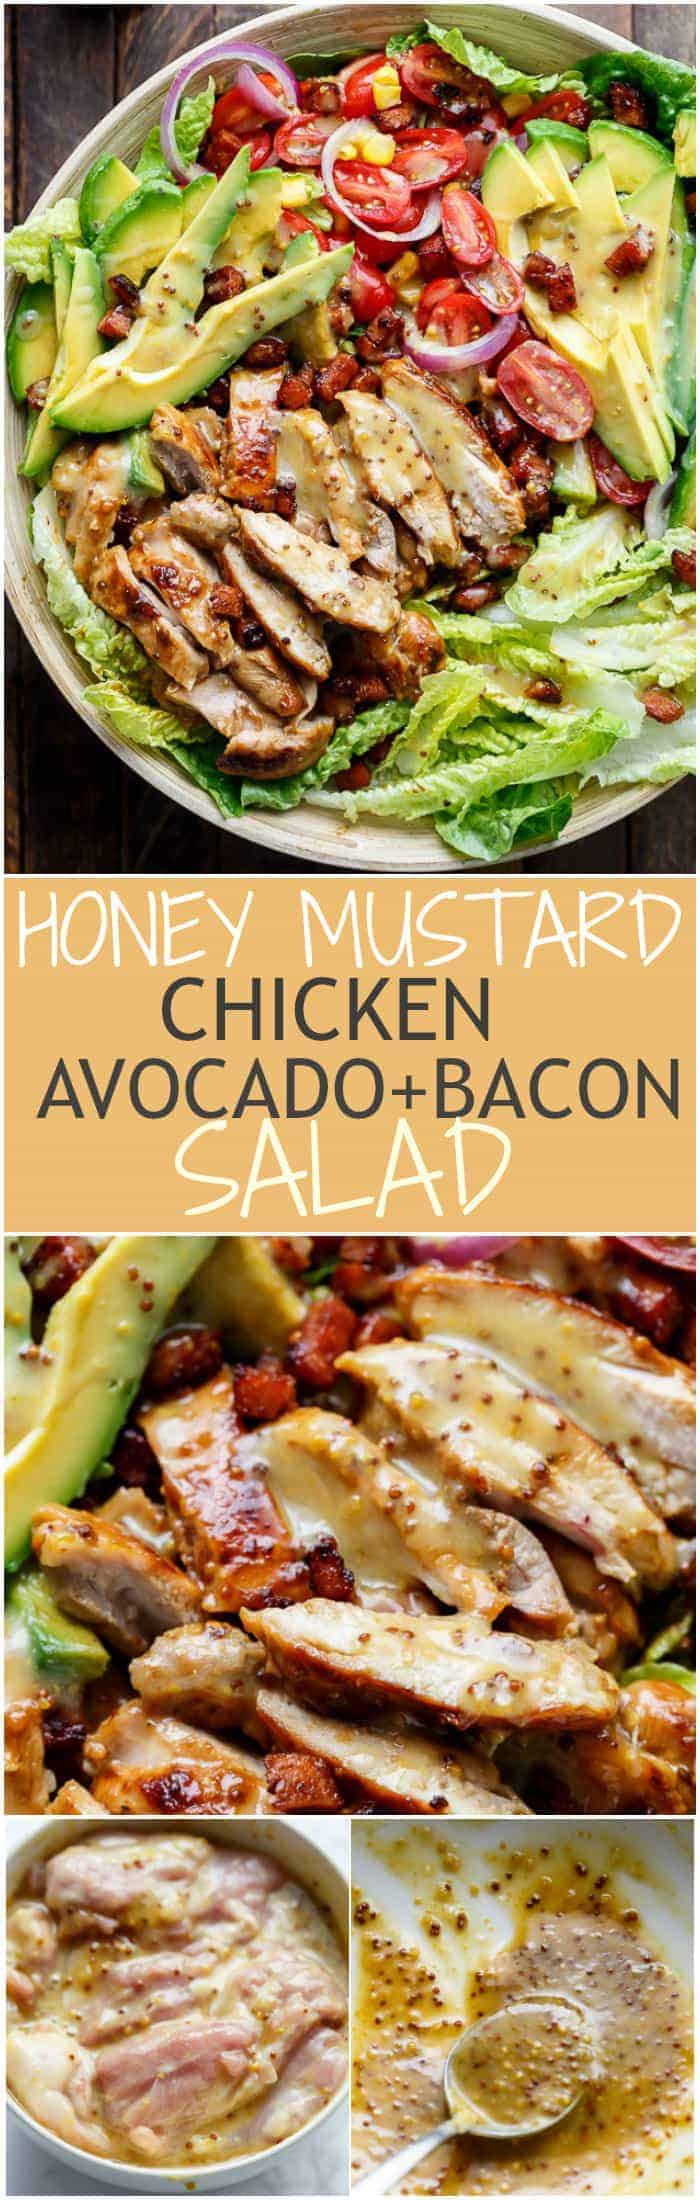 Honey Mustard Chicken, Avocado + Bacon Salad, with a crazy good Honey Mustard dressing withOUT mayonnaise or yogurt! And only 5 ingredients! | https://cafedelites.com